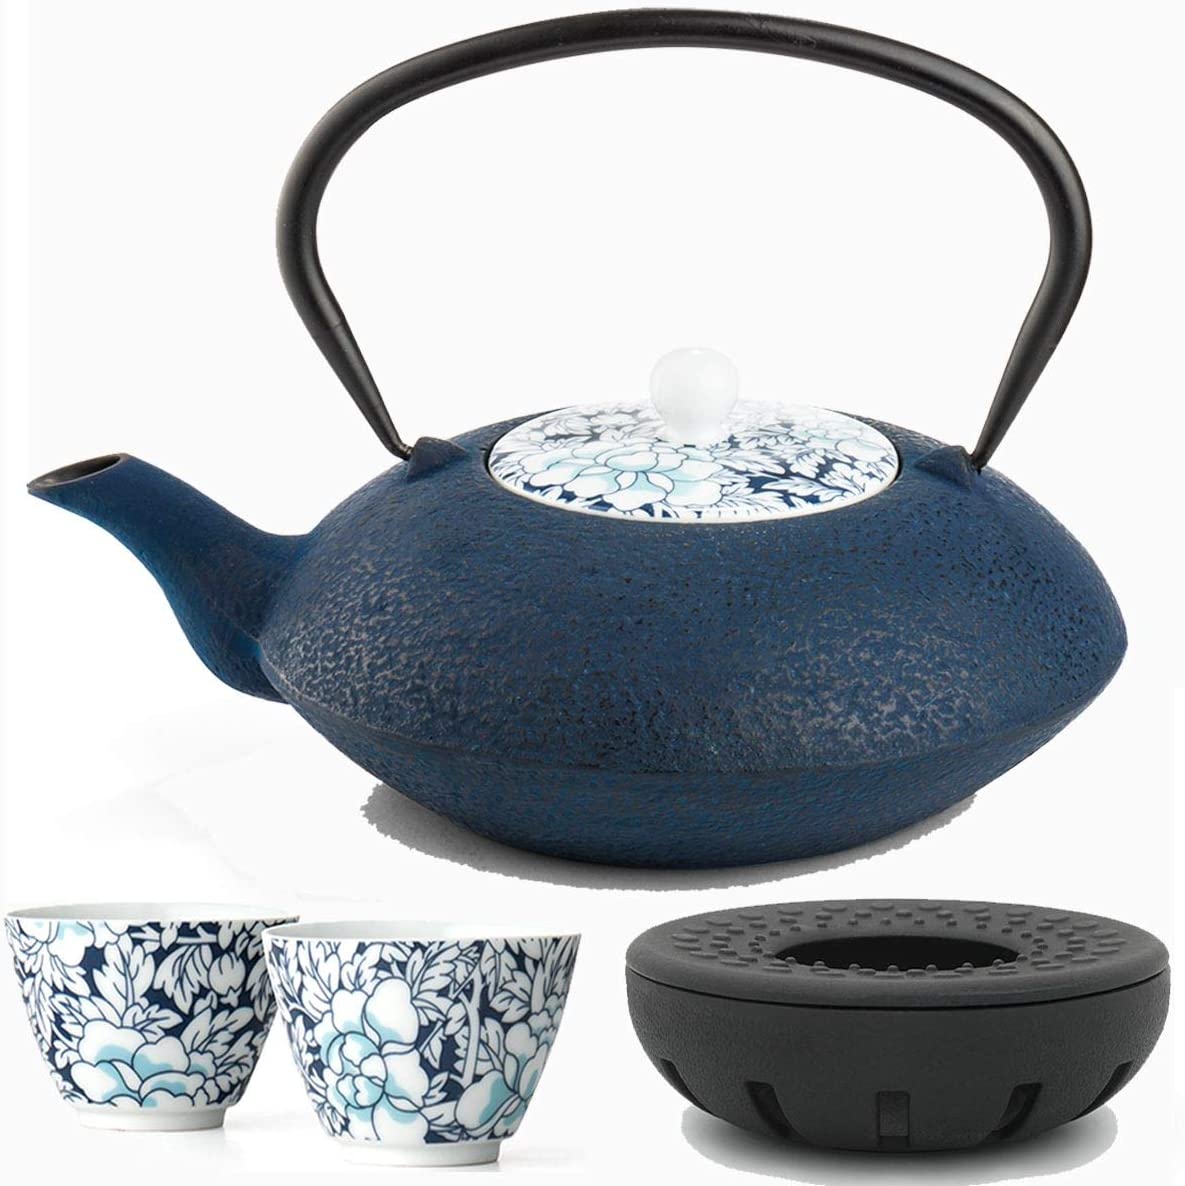 Bredemeijer Asian Cast Iron Teapot Set Blue 1.2 Litres with Tea Filter Strainer and Cast Iron Teapot Warmer Including Tea Cup Porcelain